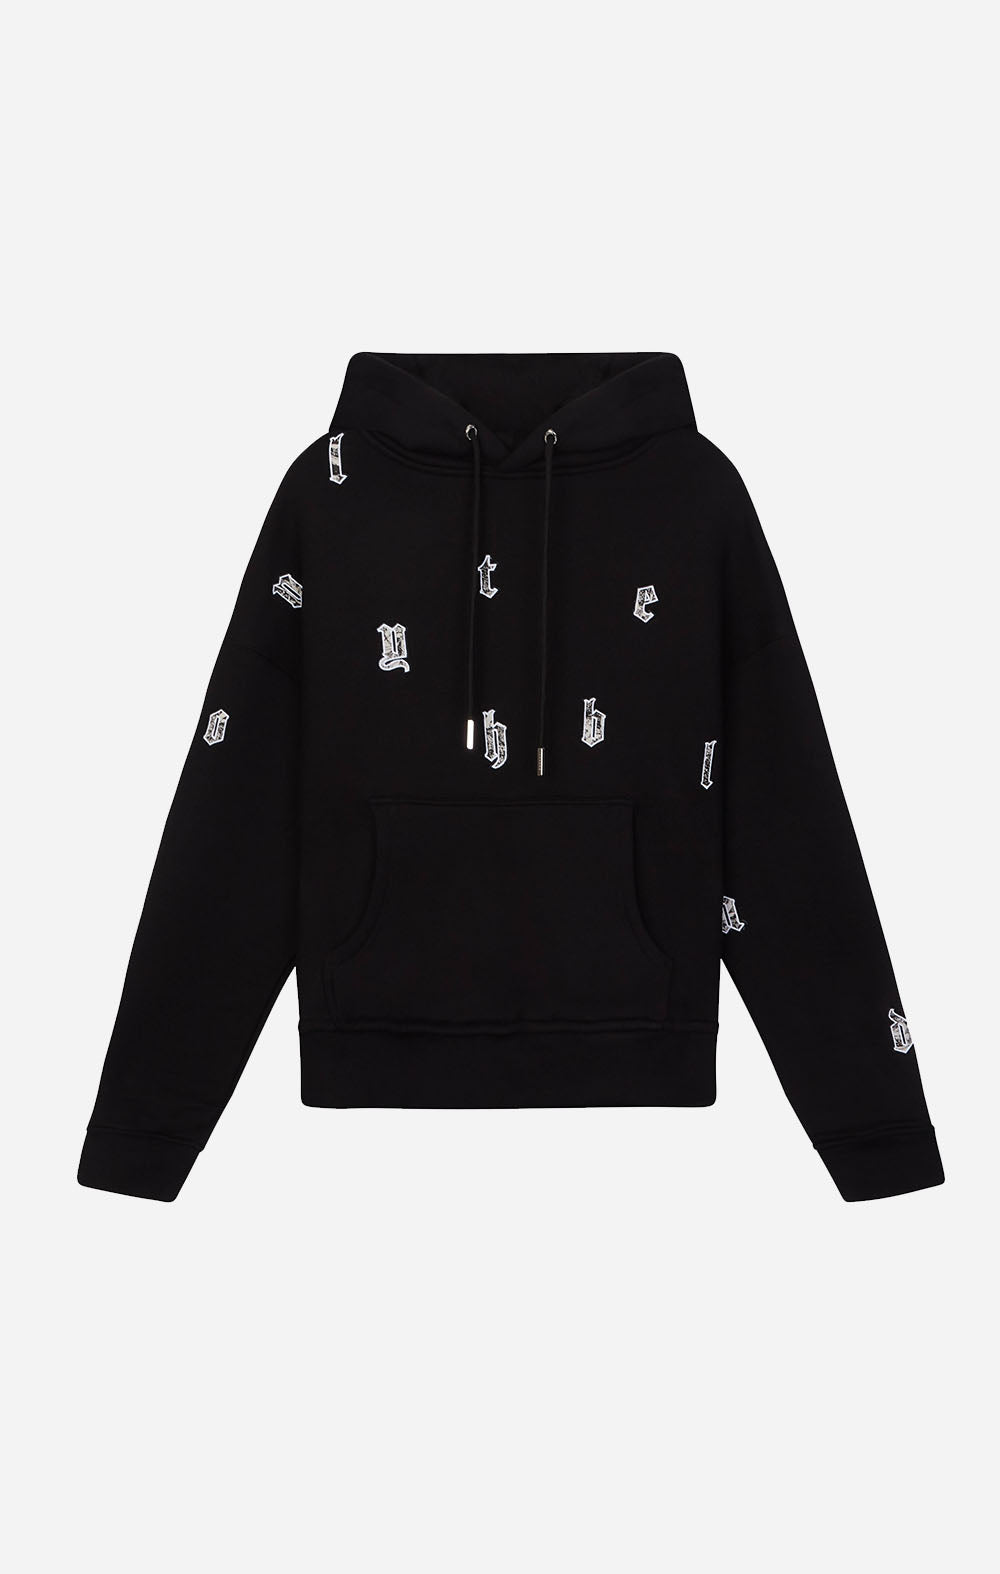 ONLY THE BLIND - Tapestry Jacquard Hoodie